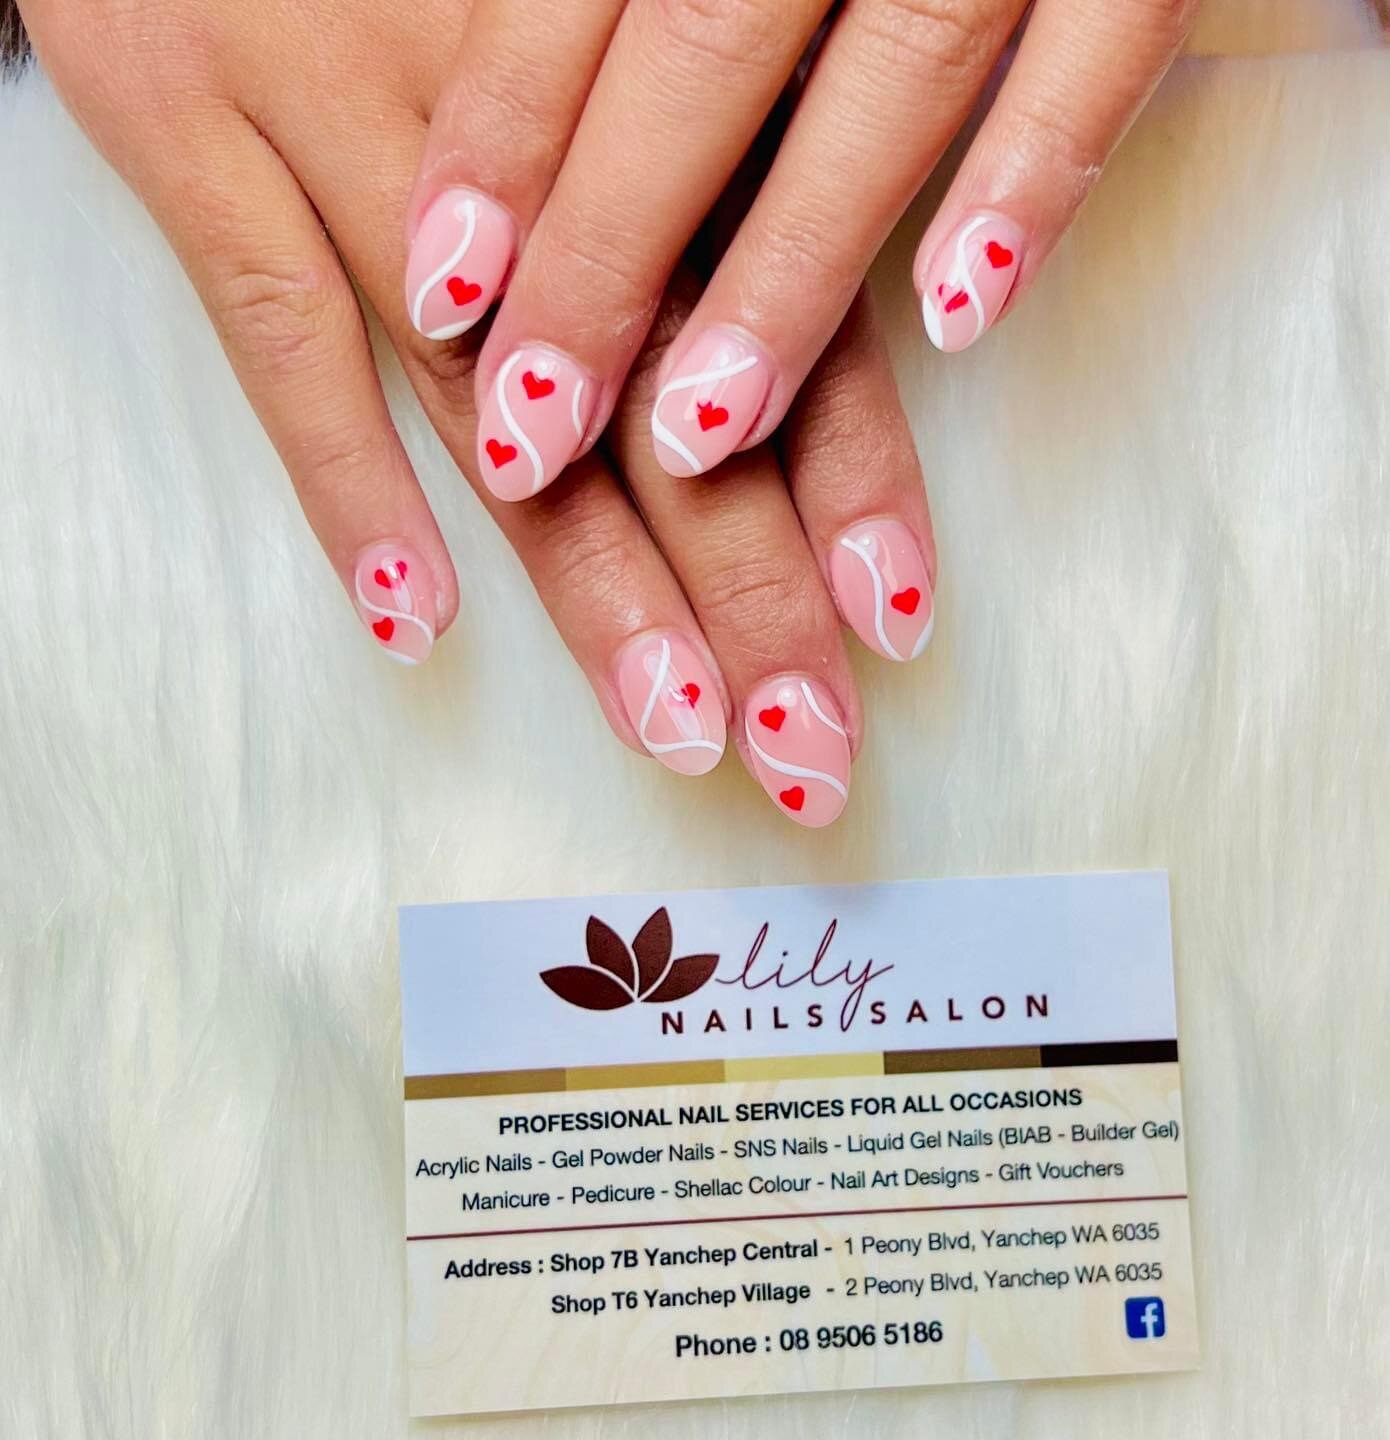 Fall in love with your nails this Valentine's Day! 💅❤️ 

The @lily_nails_salon_yanchep team have you sorted with beautiful Valentine's Day nail art designs! 

Walk-in appointments are available.